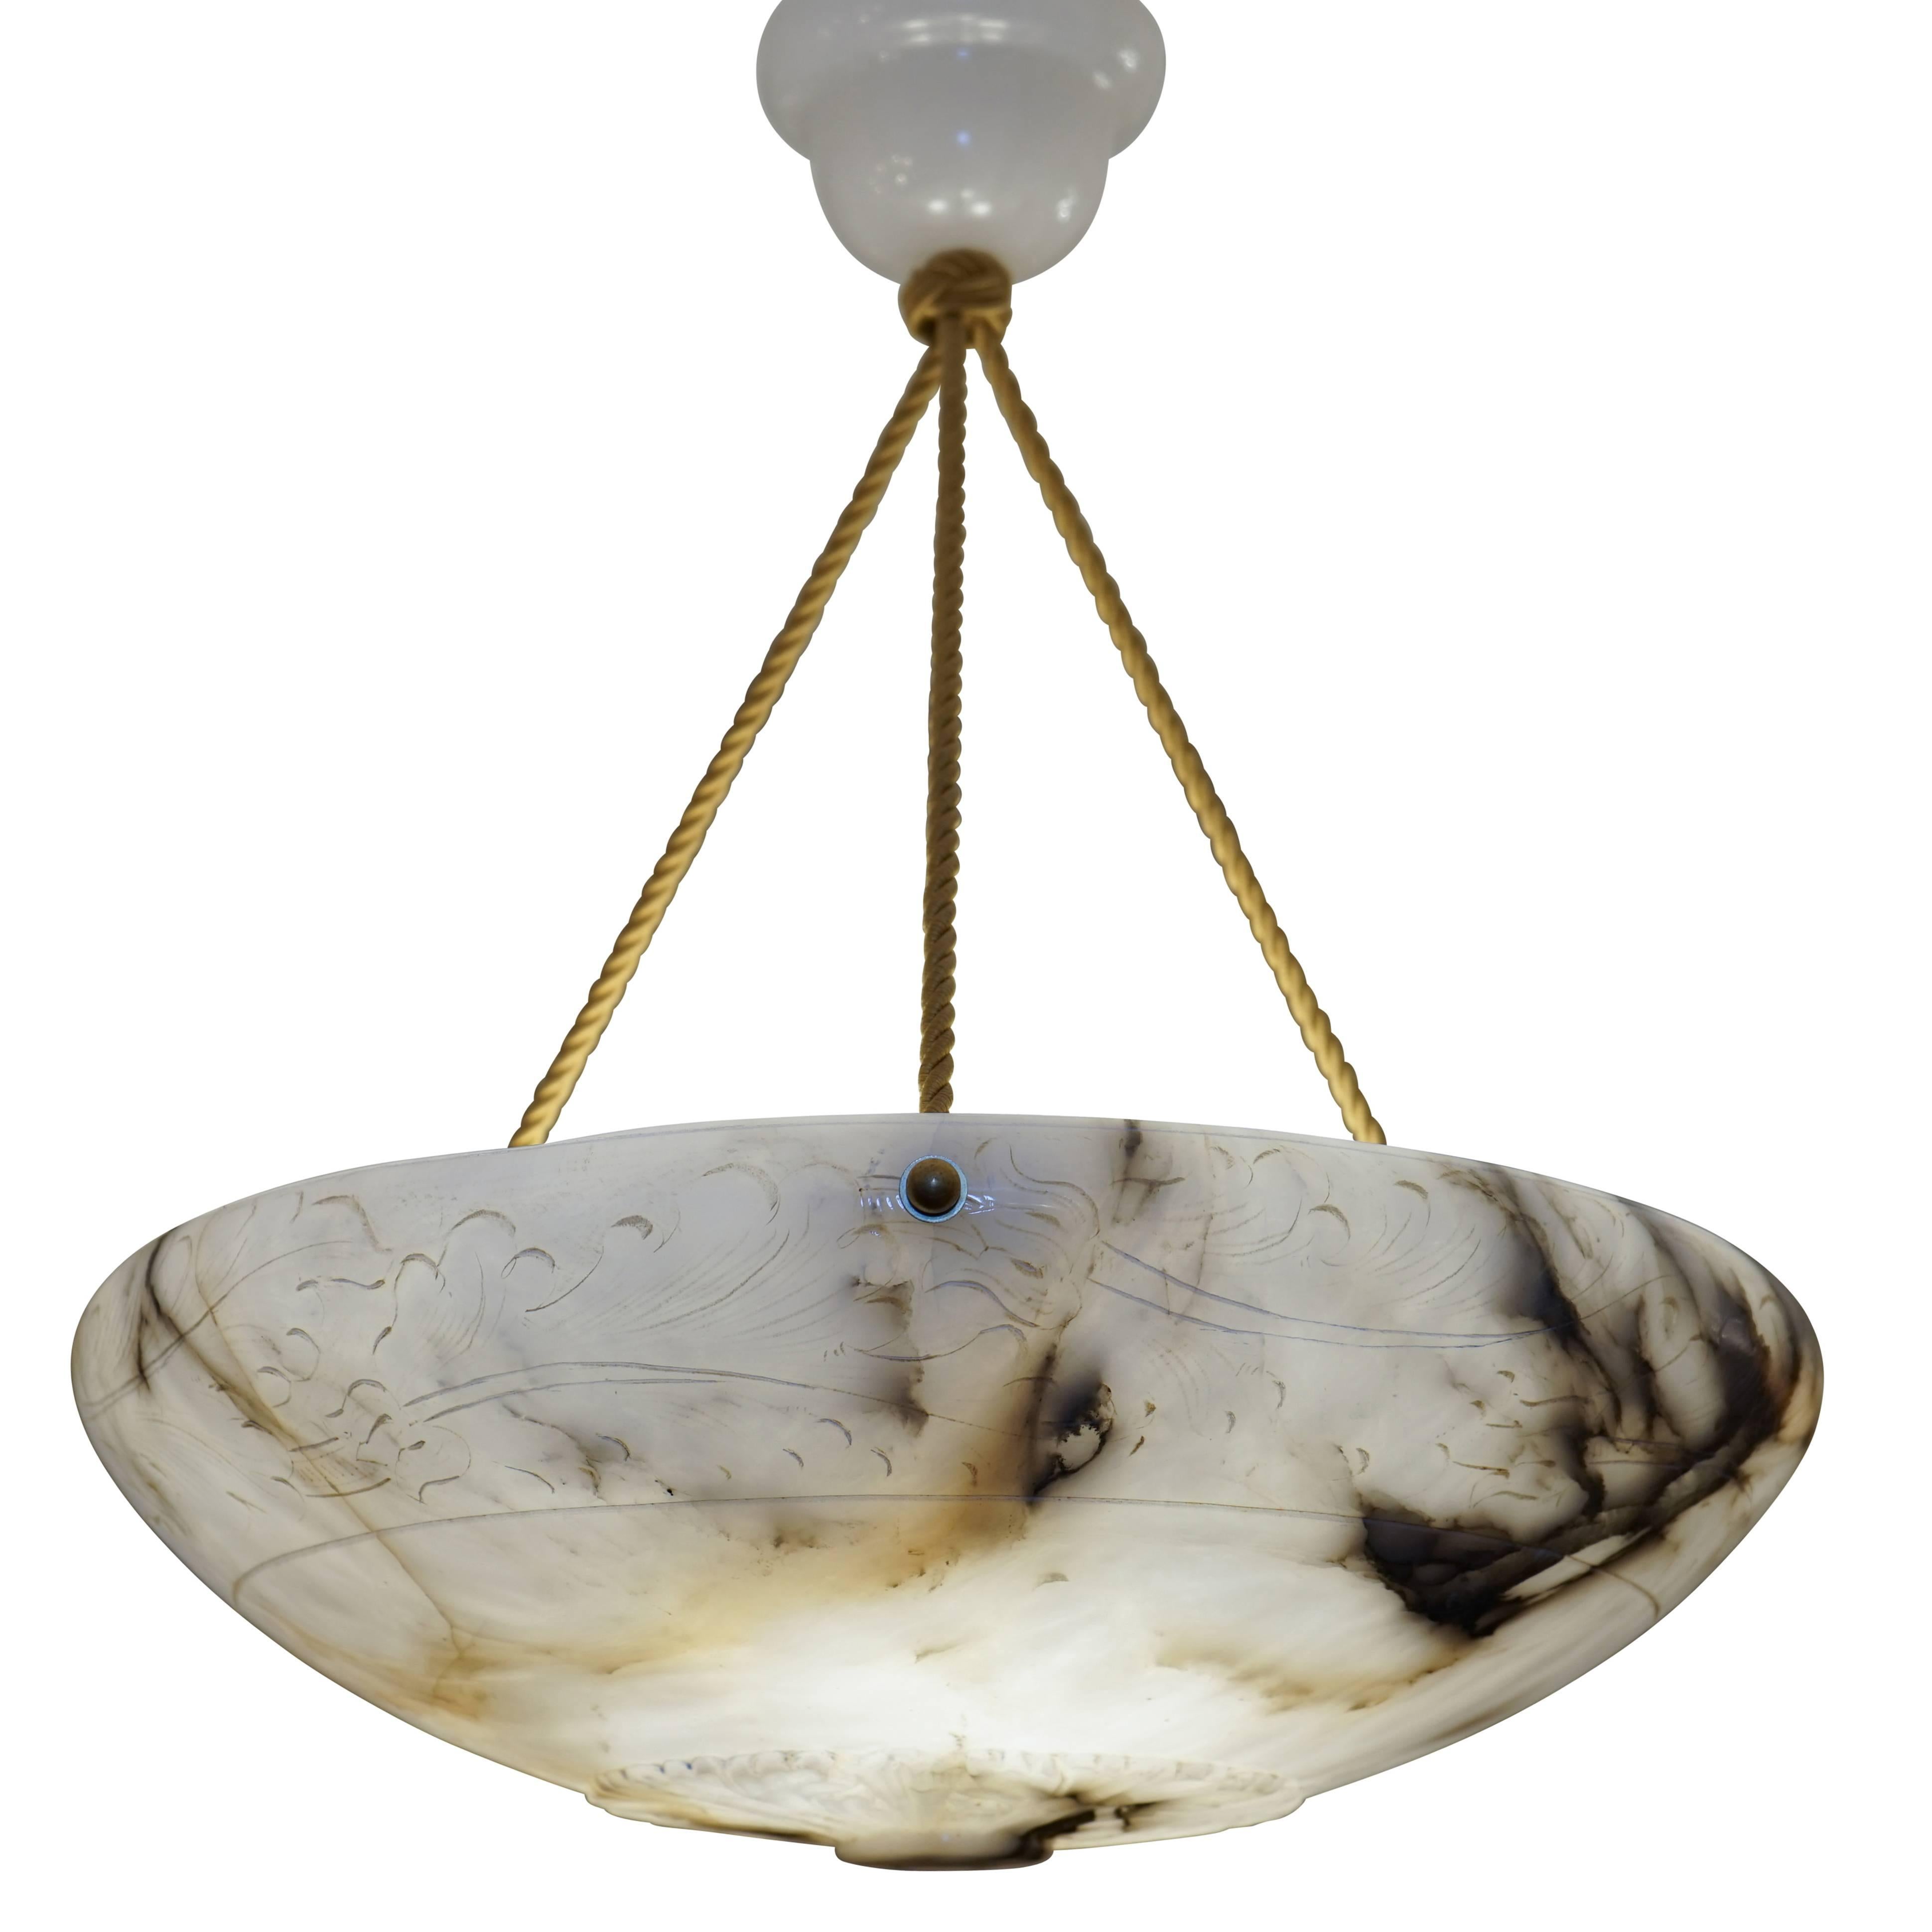 A lovely fixture, featuring discreet carving around a full upper band, a base medallion, and dramatic, multi-toned mineral veining. Recently rewired, the light holds three 60 watt incandescent bulbs, or three LED bulbs of any wattage equivalence.